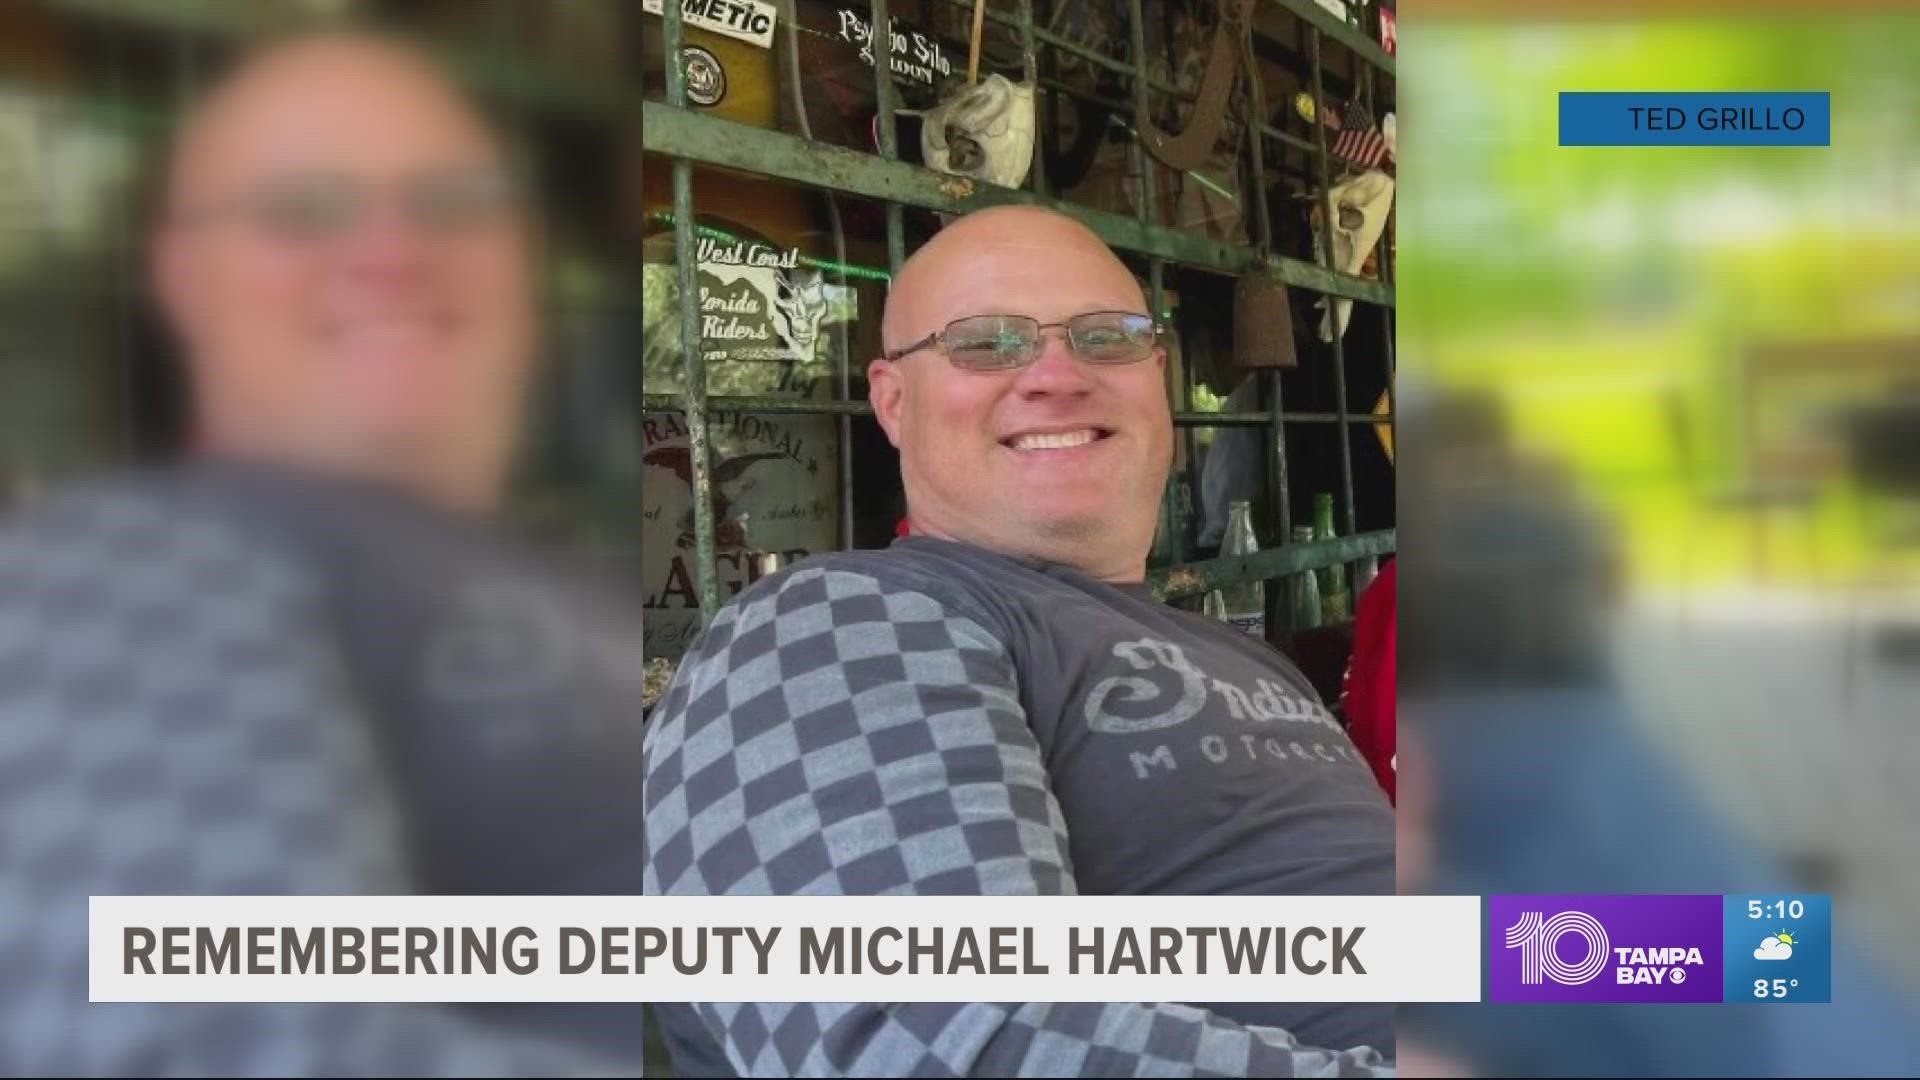 The sheriff's office says the man accused of hitting Deputy Michael Hartwick with a large front loader drove for another quarter of a mile before fleeing the area.